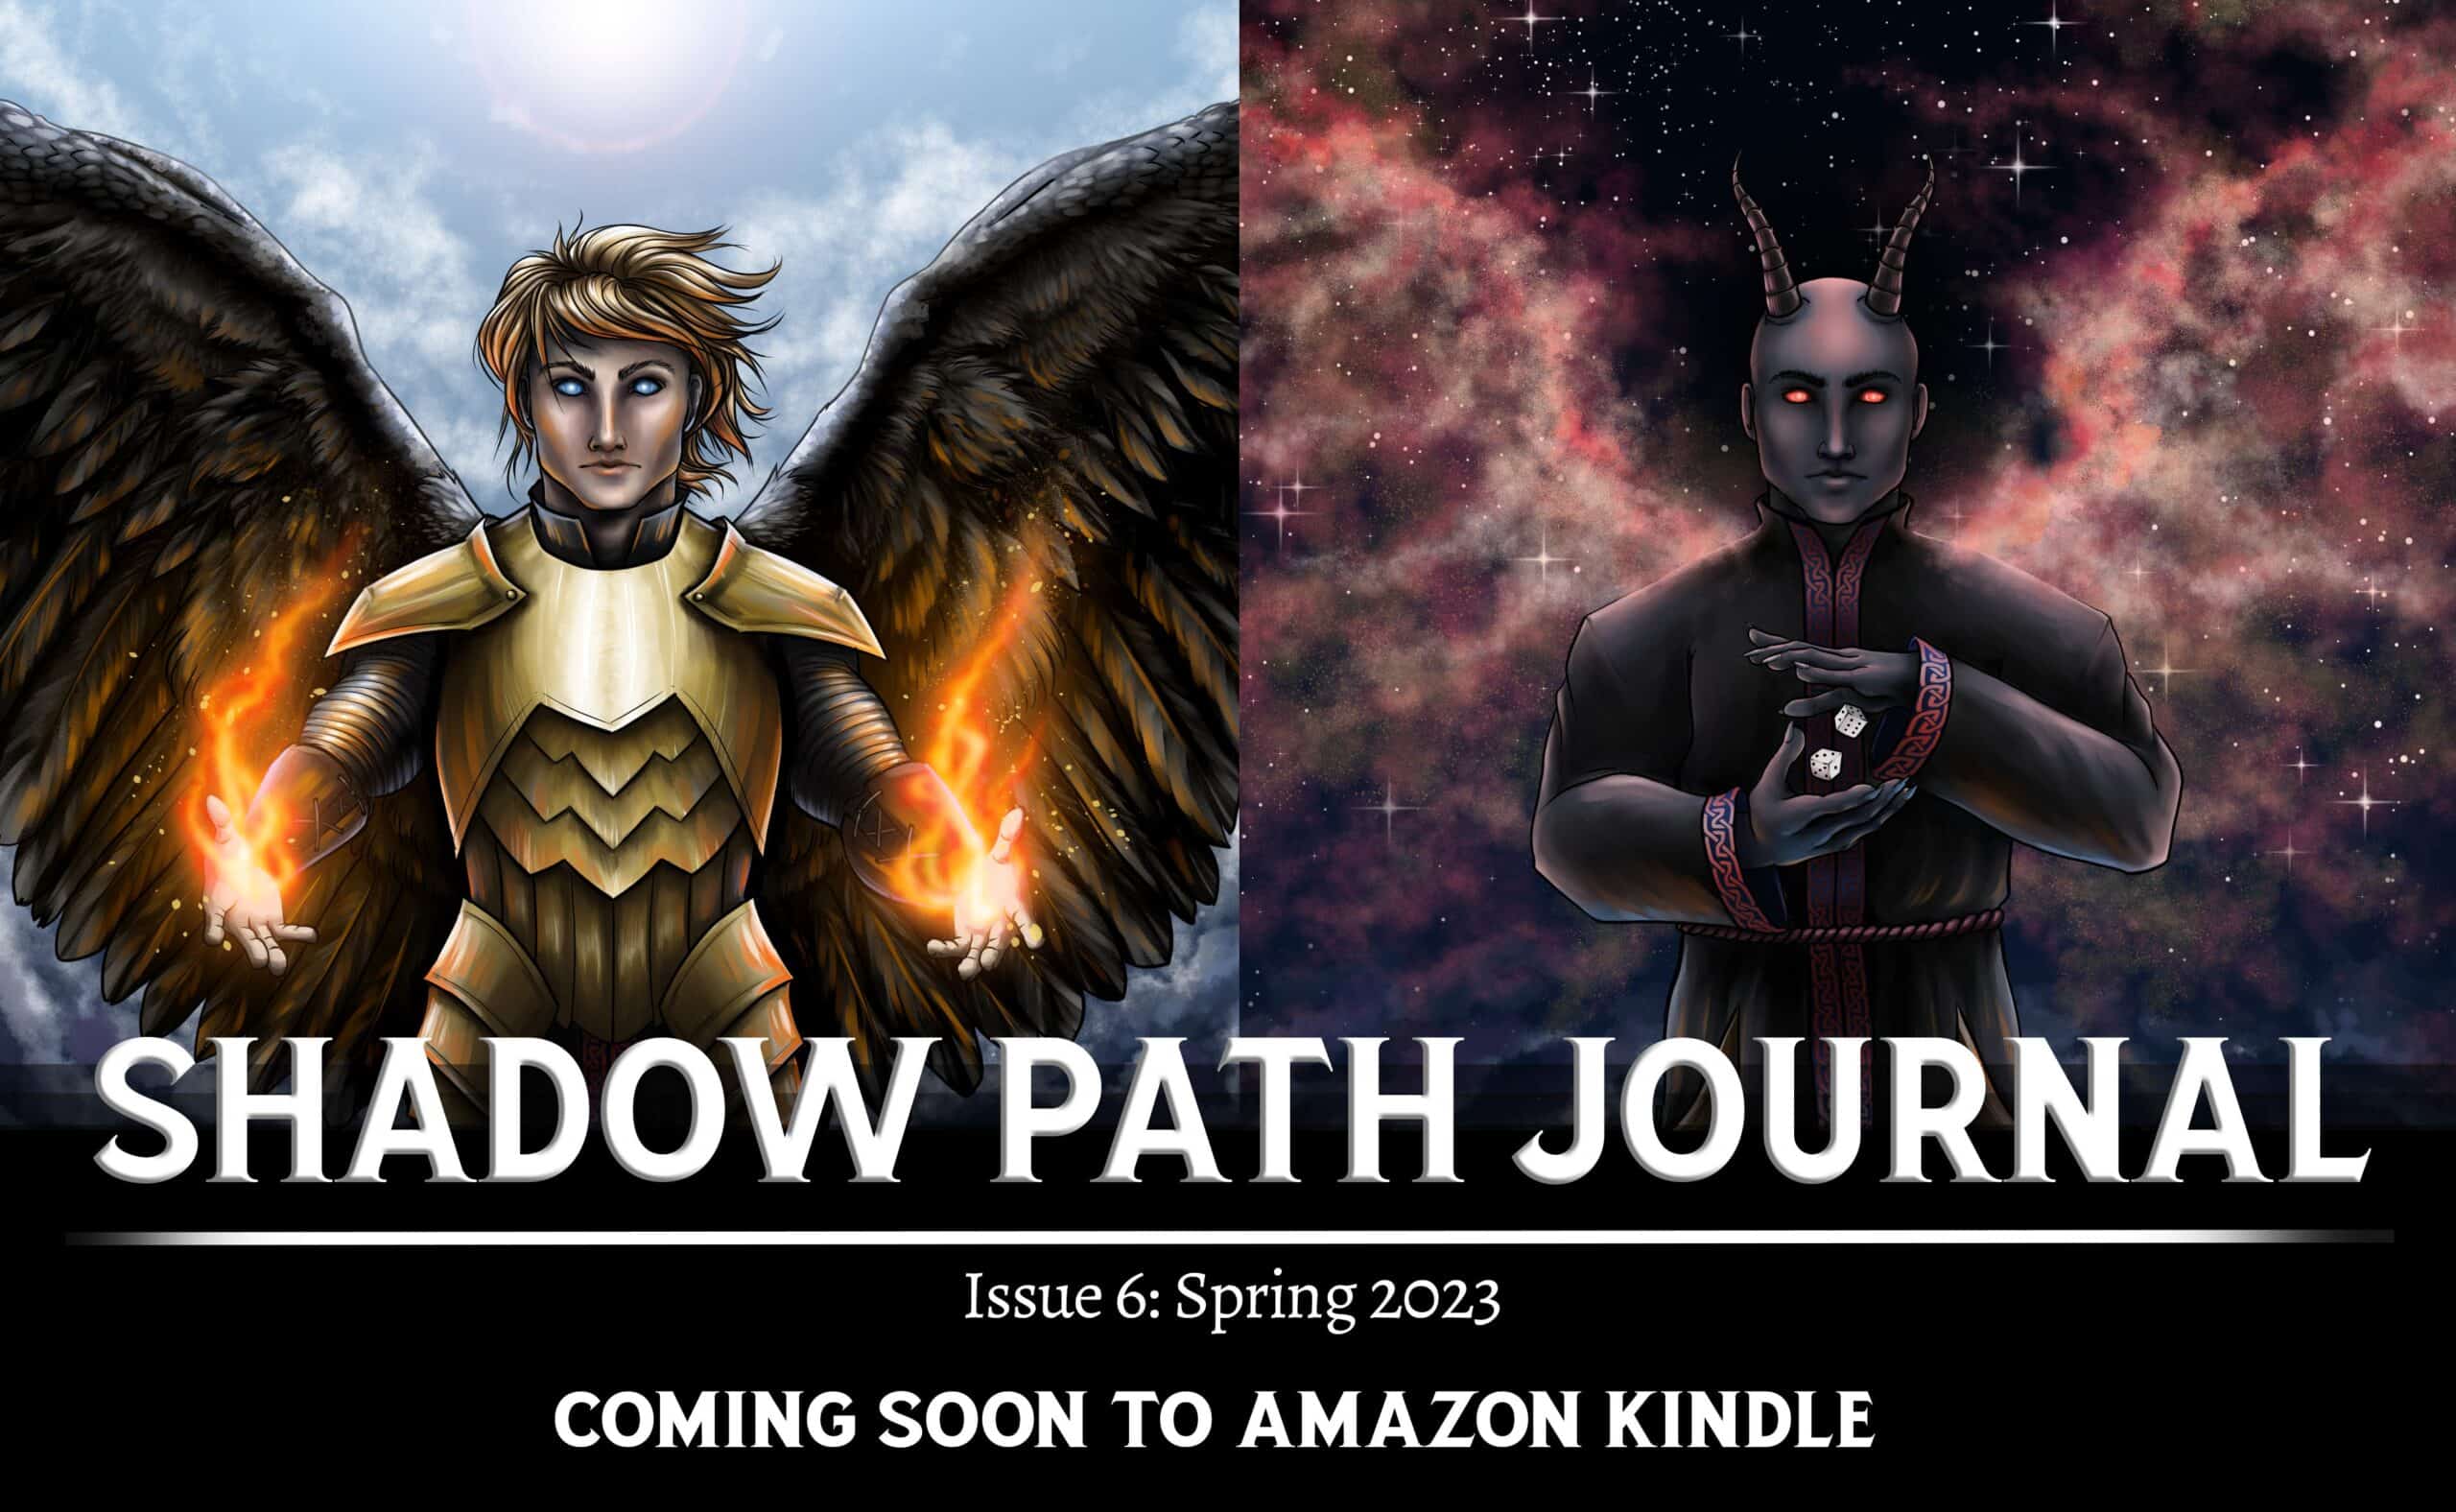 Shadow Path Journal Issue 6: Spring 2023